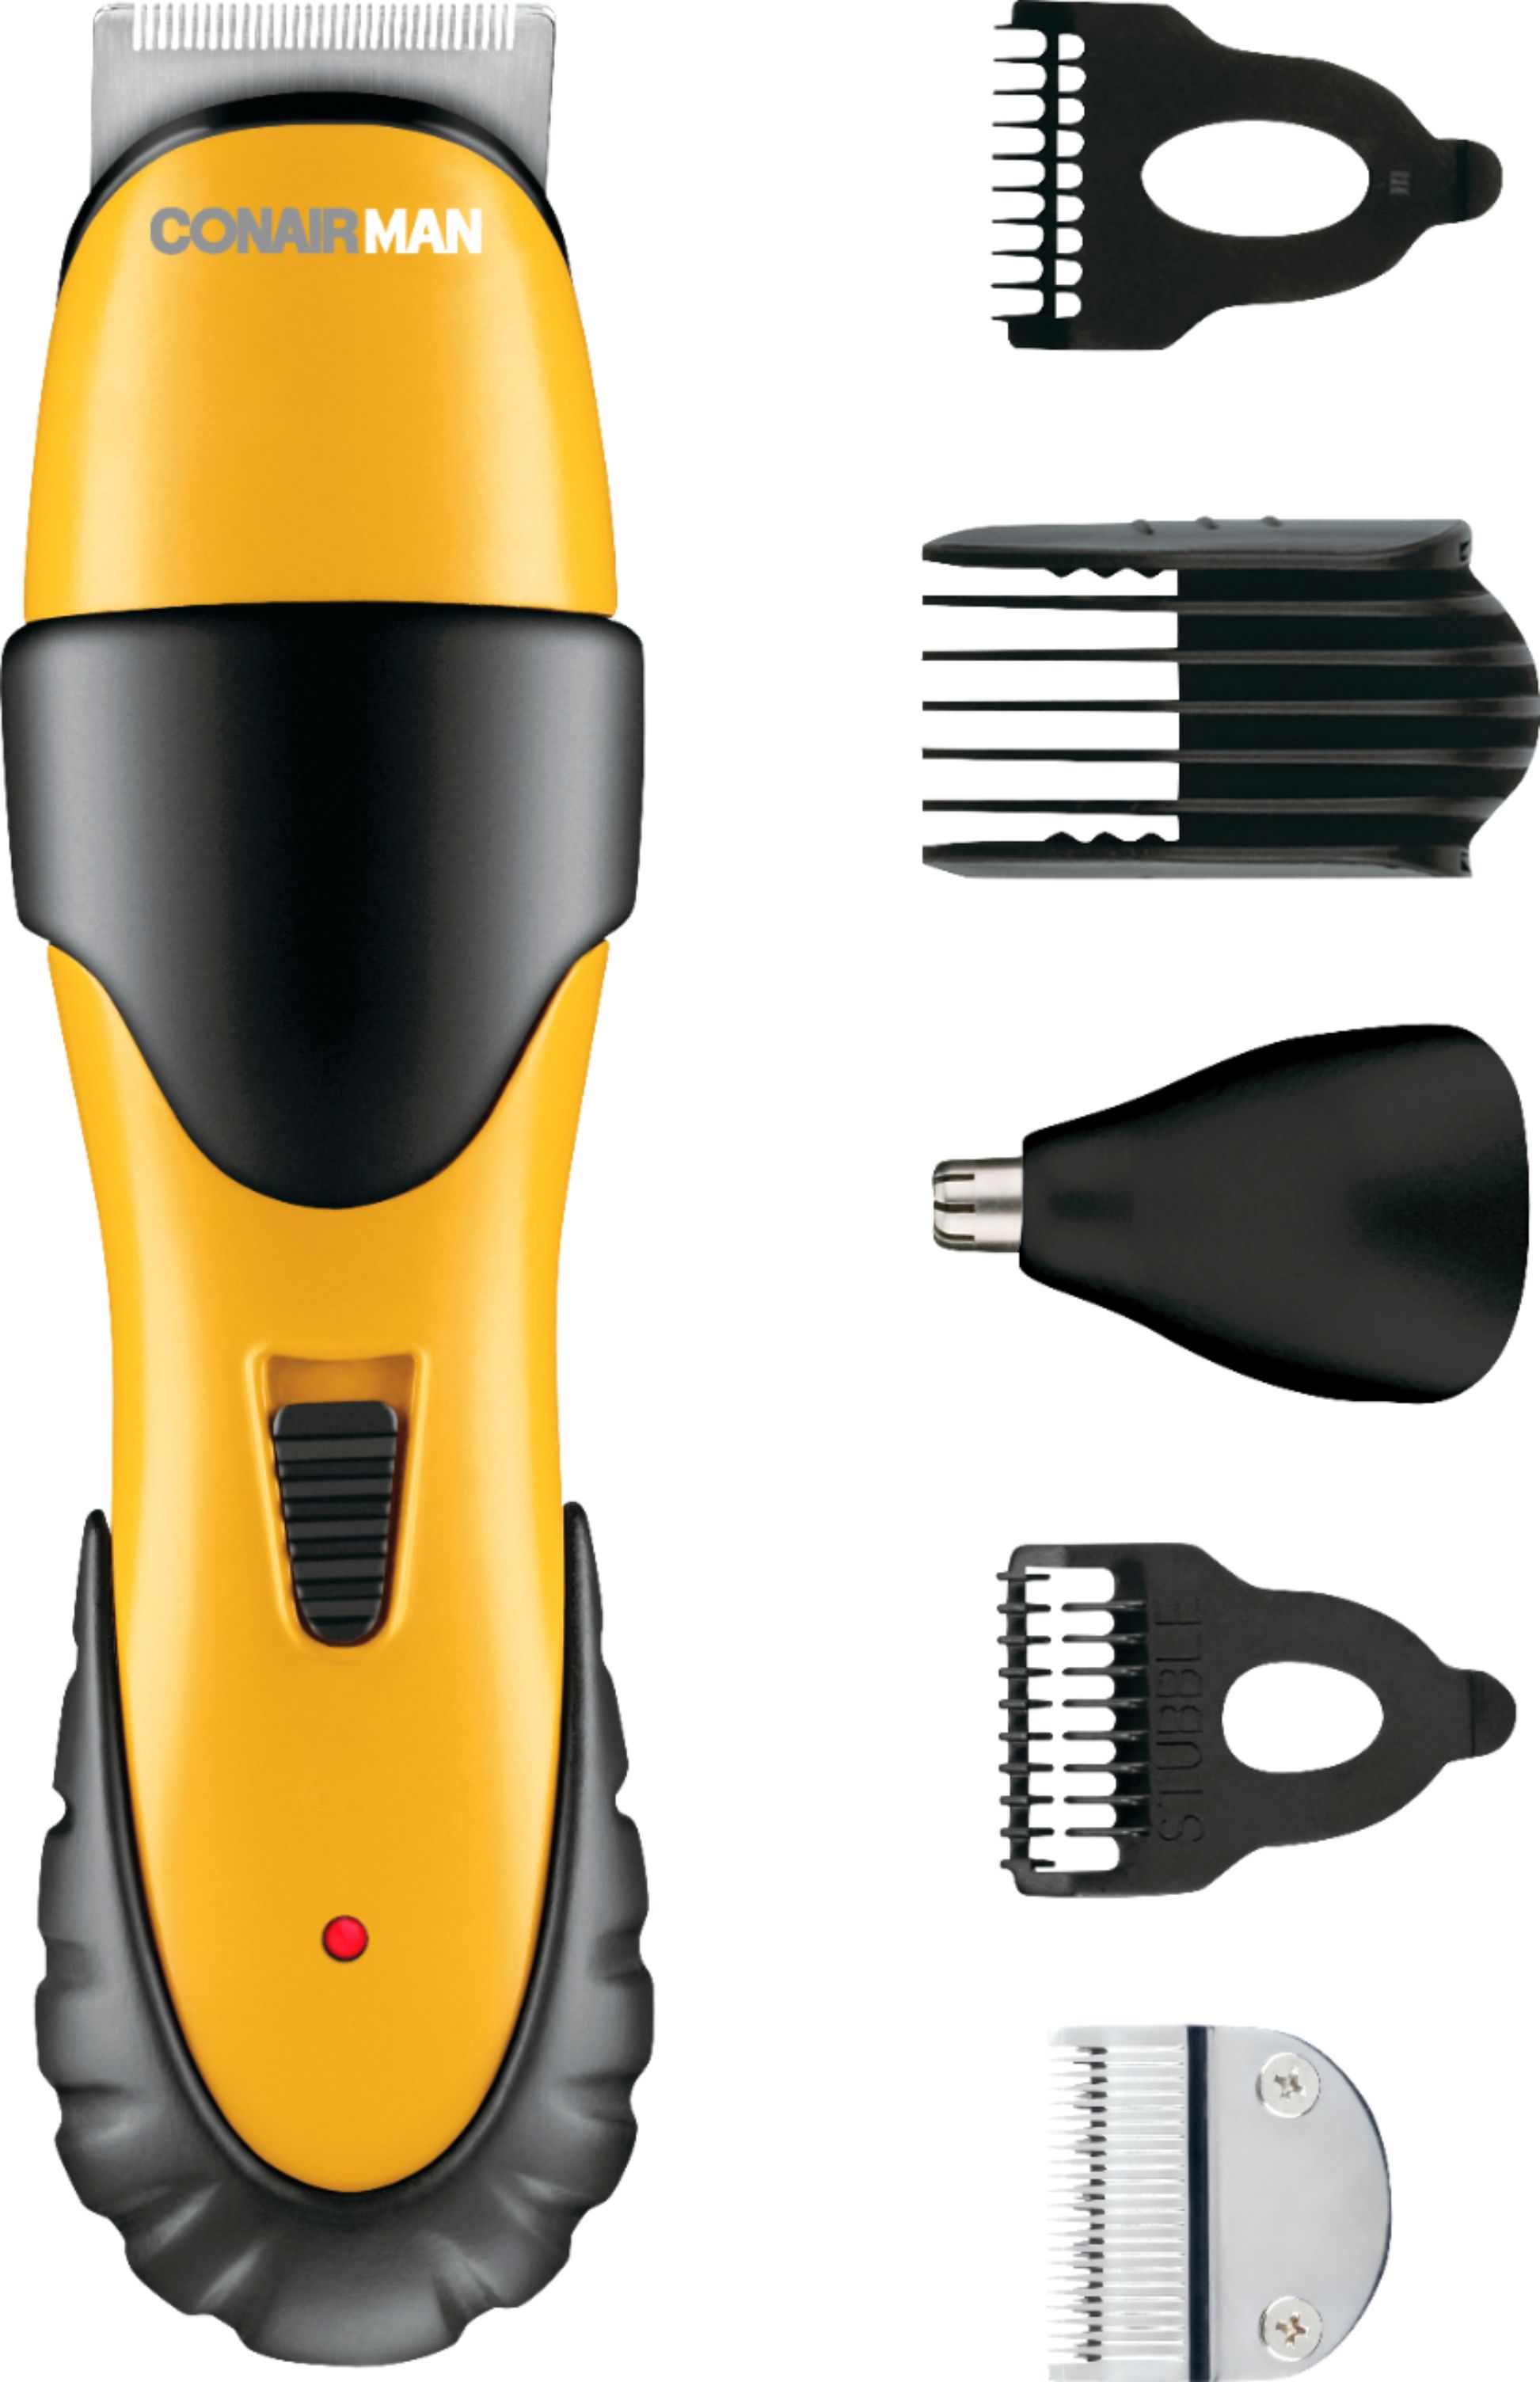 conairman all in 1 trimmer manual